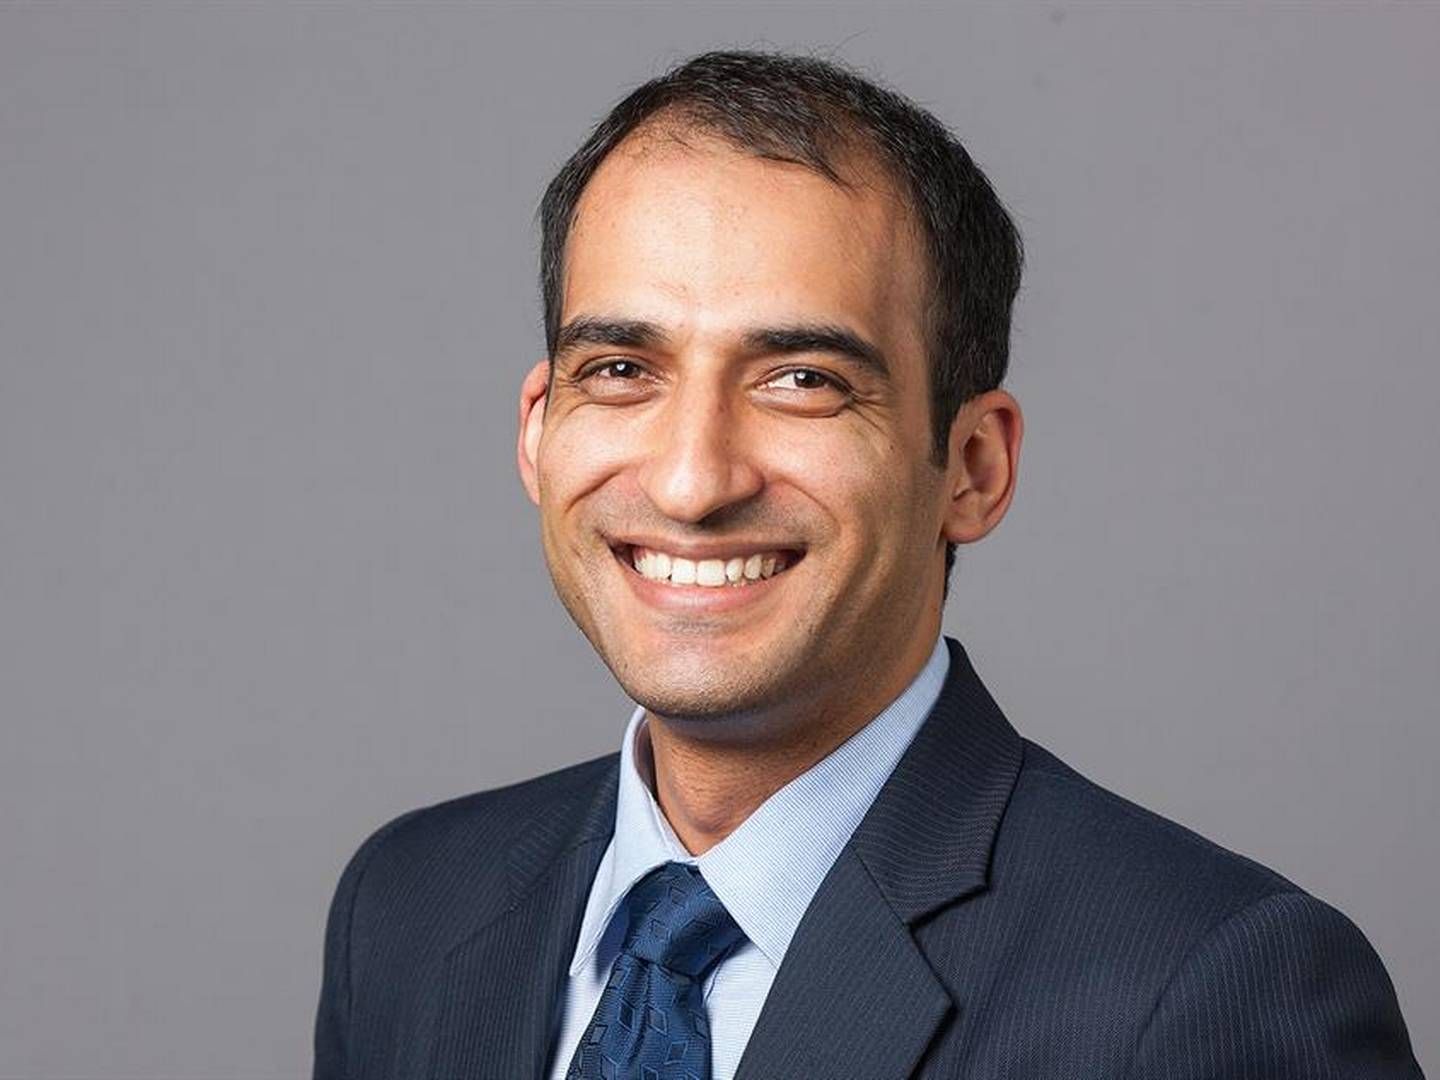 On June 1, Senvion's former CFO Manav Sharma started as US country manager for Nordex. Soon he will have a new factory at his disposal. | Foto: Senvion